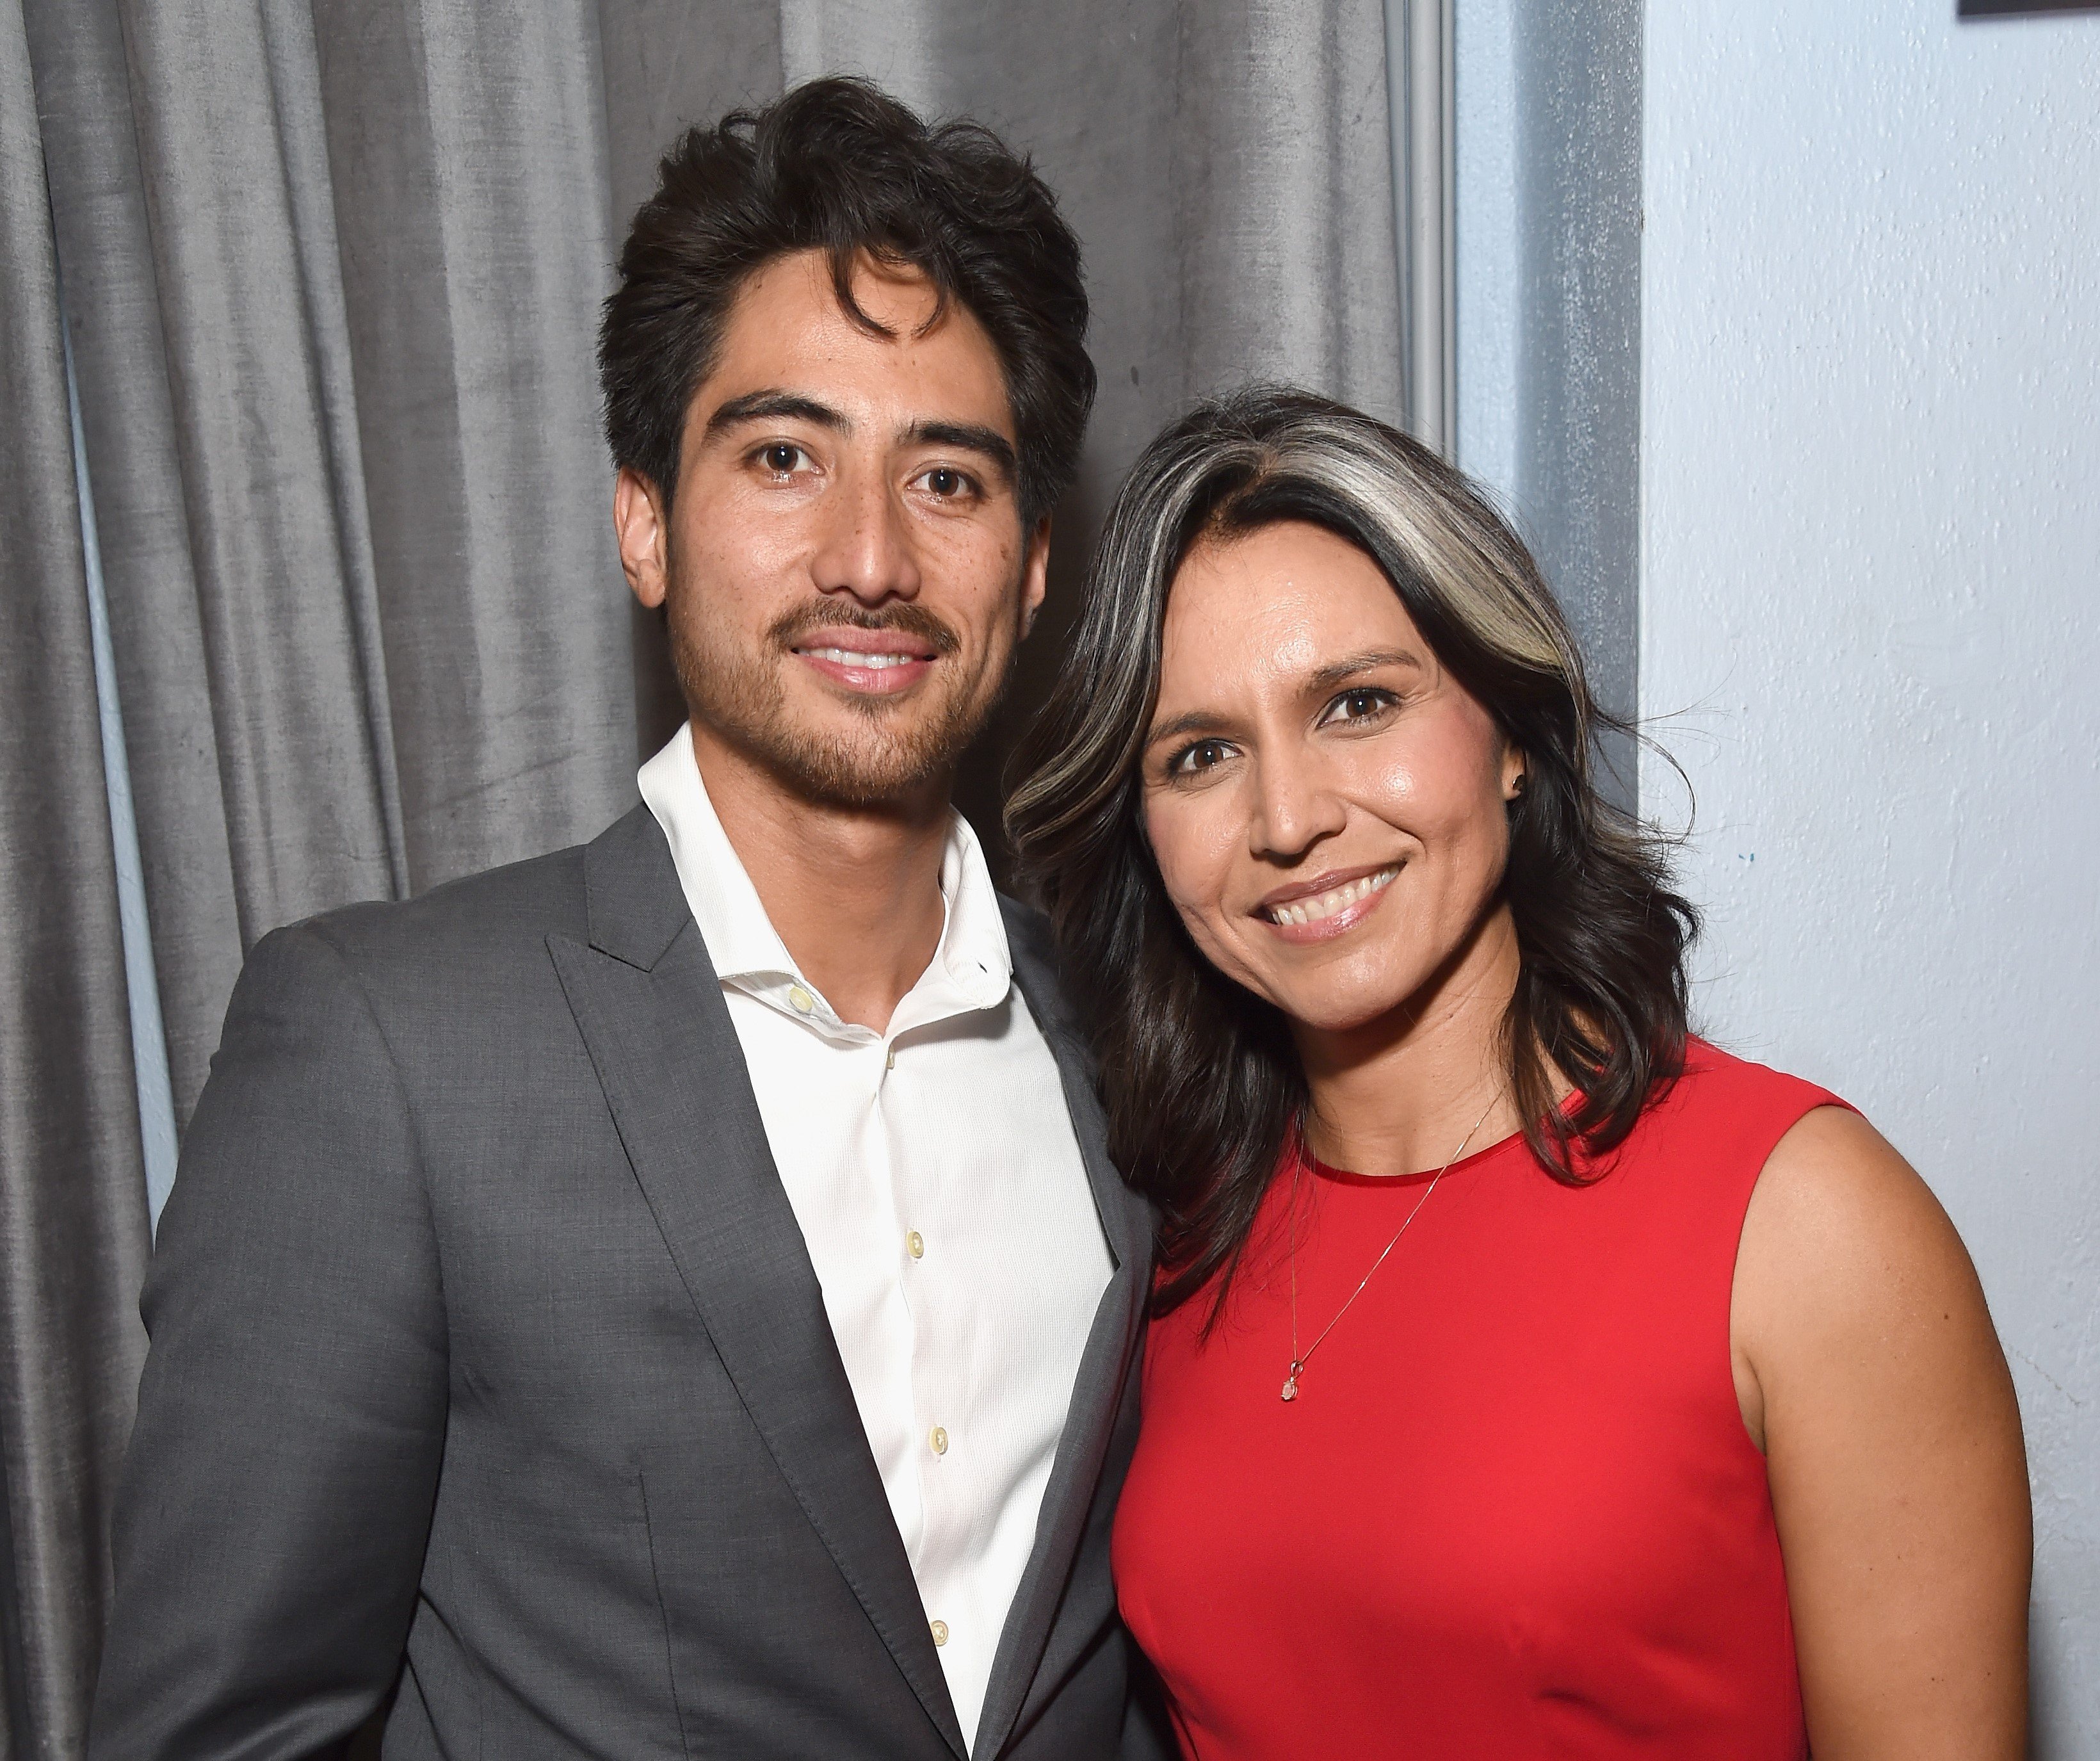 Abraham Williams (L) and Tulsi Gabbard attend the Sean Penn CORE Gala at The Wiltern on January 5, 2019, in Los Angeles, California. | Source: Getty Images 